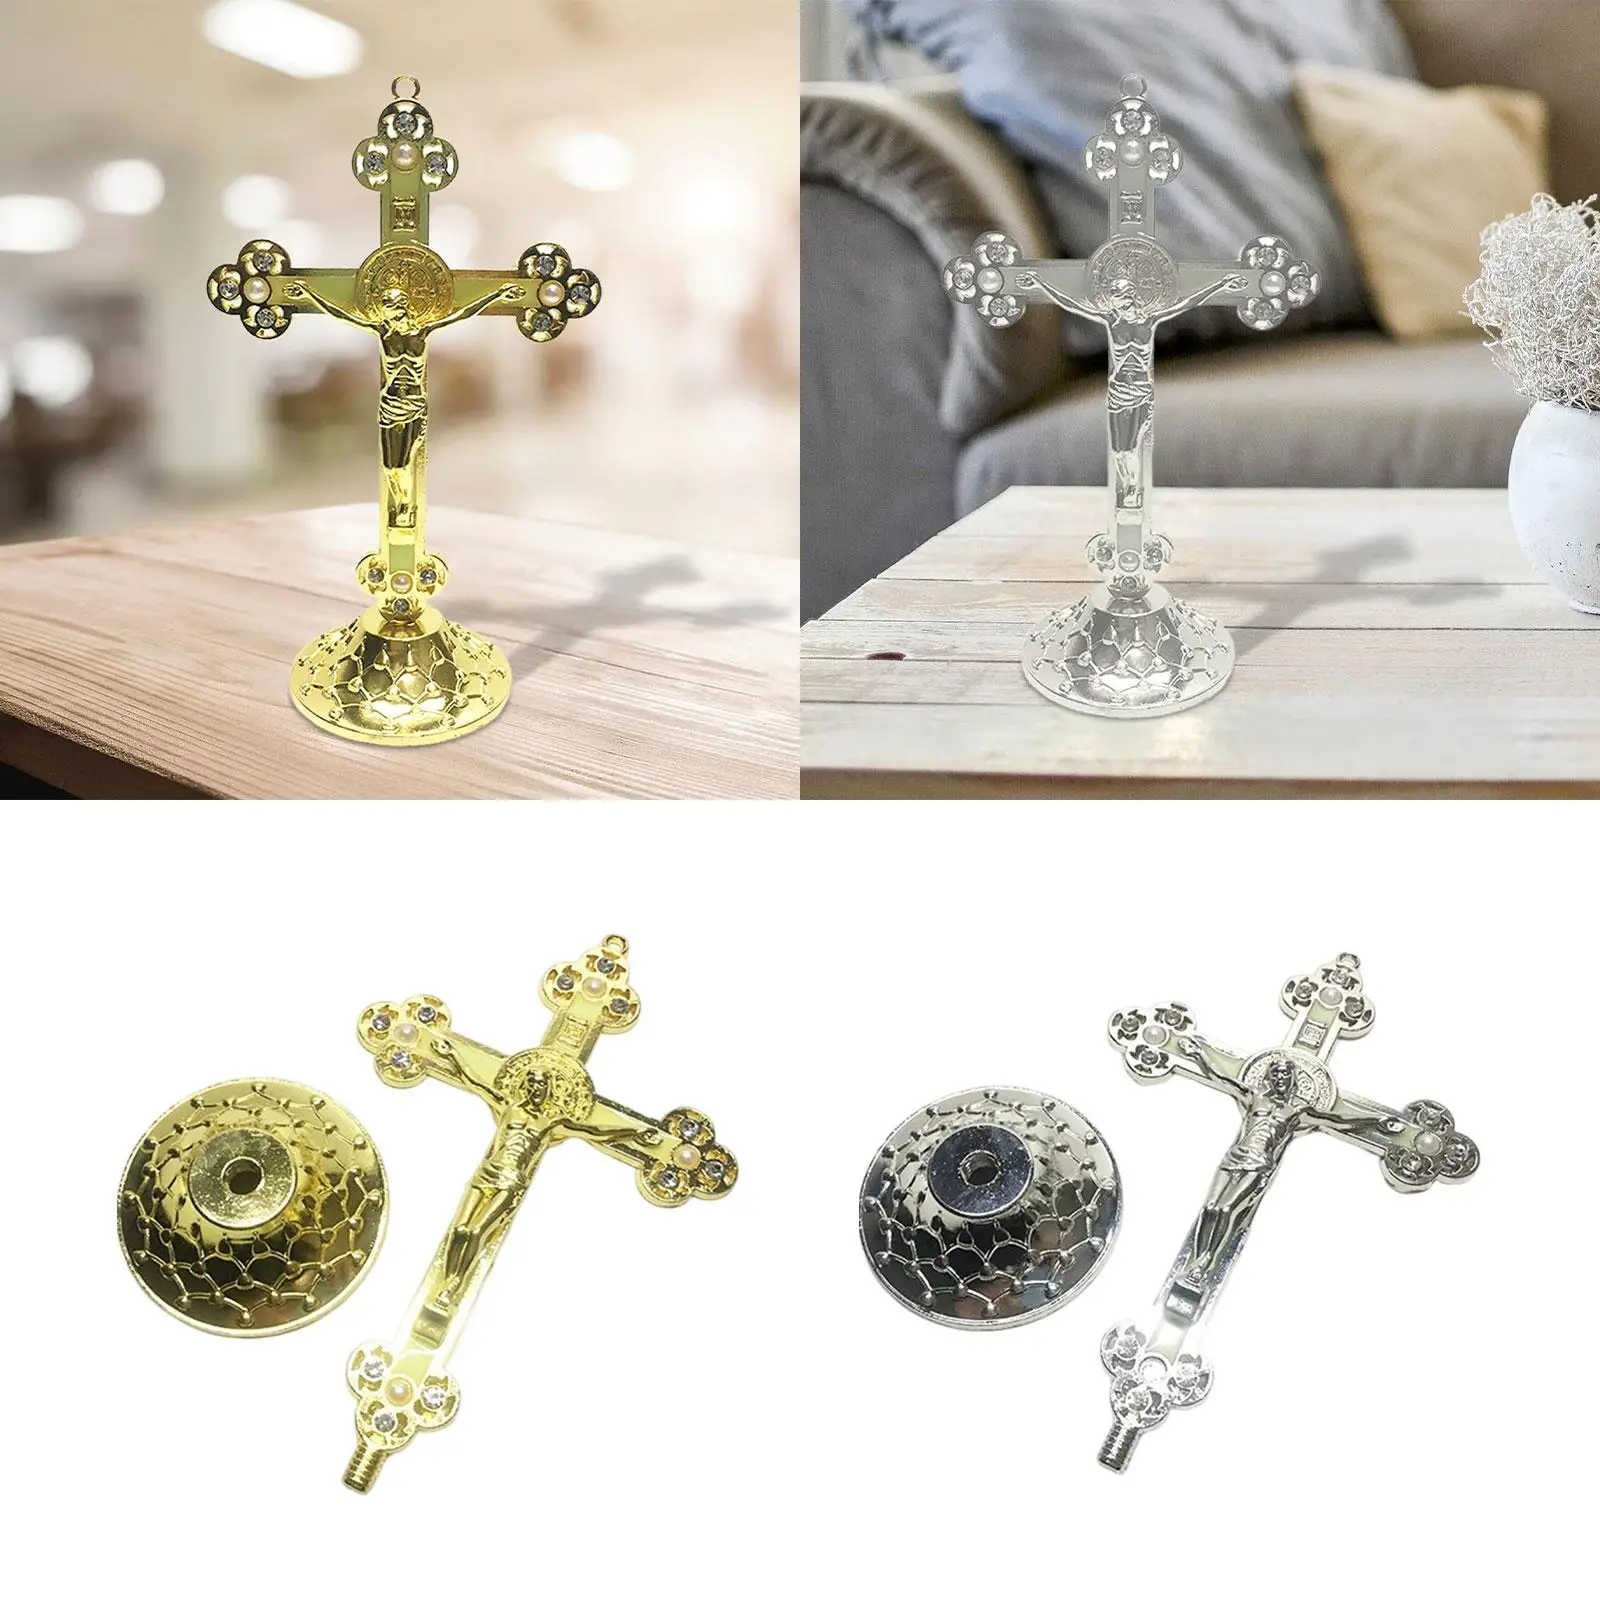 Crucifix Figurine Catholic Collection Figurine Religious Cross Statue for Shelf Living Room Easter Thanksgiving Home Decoration